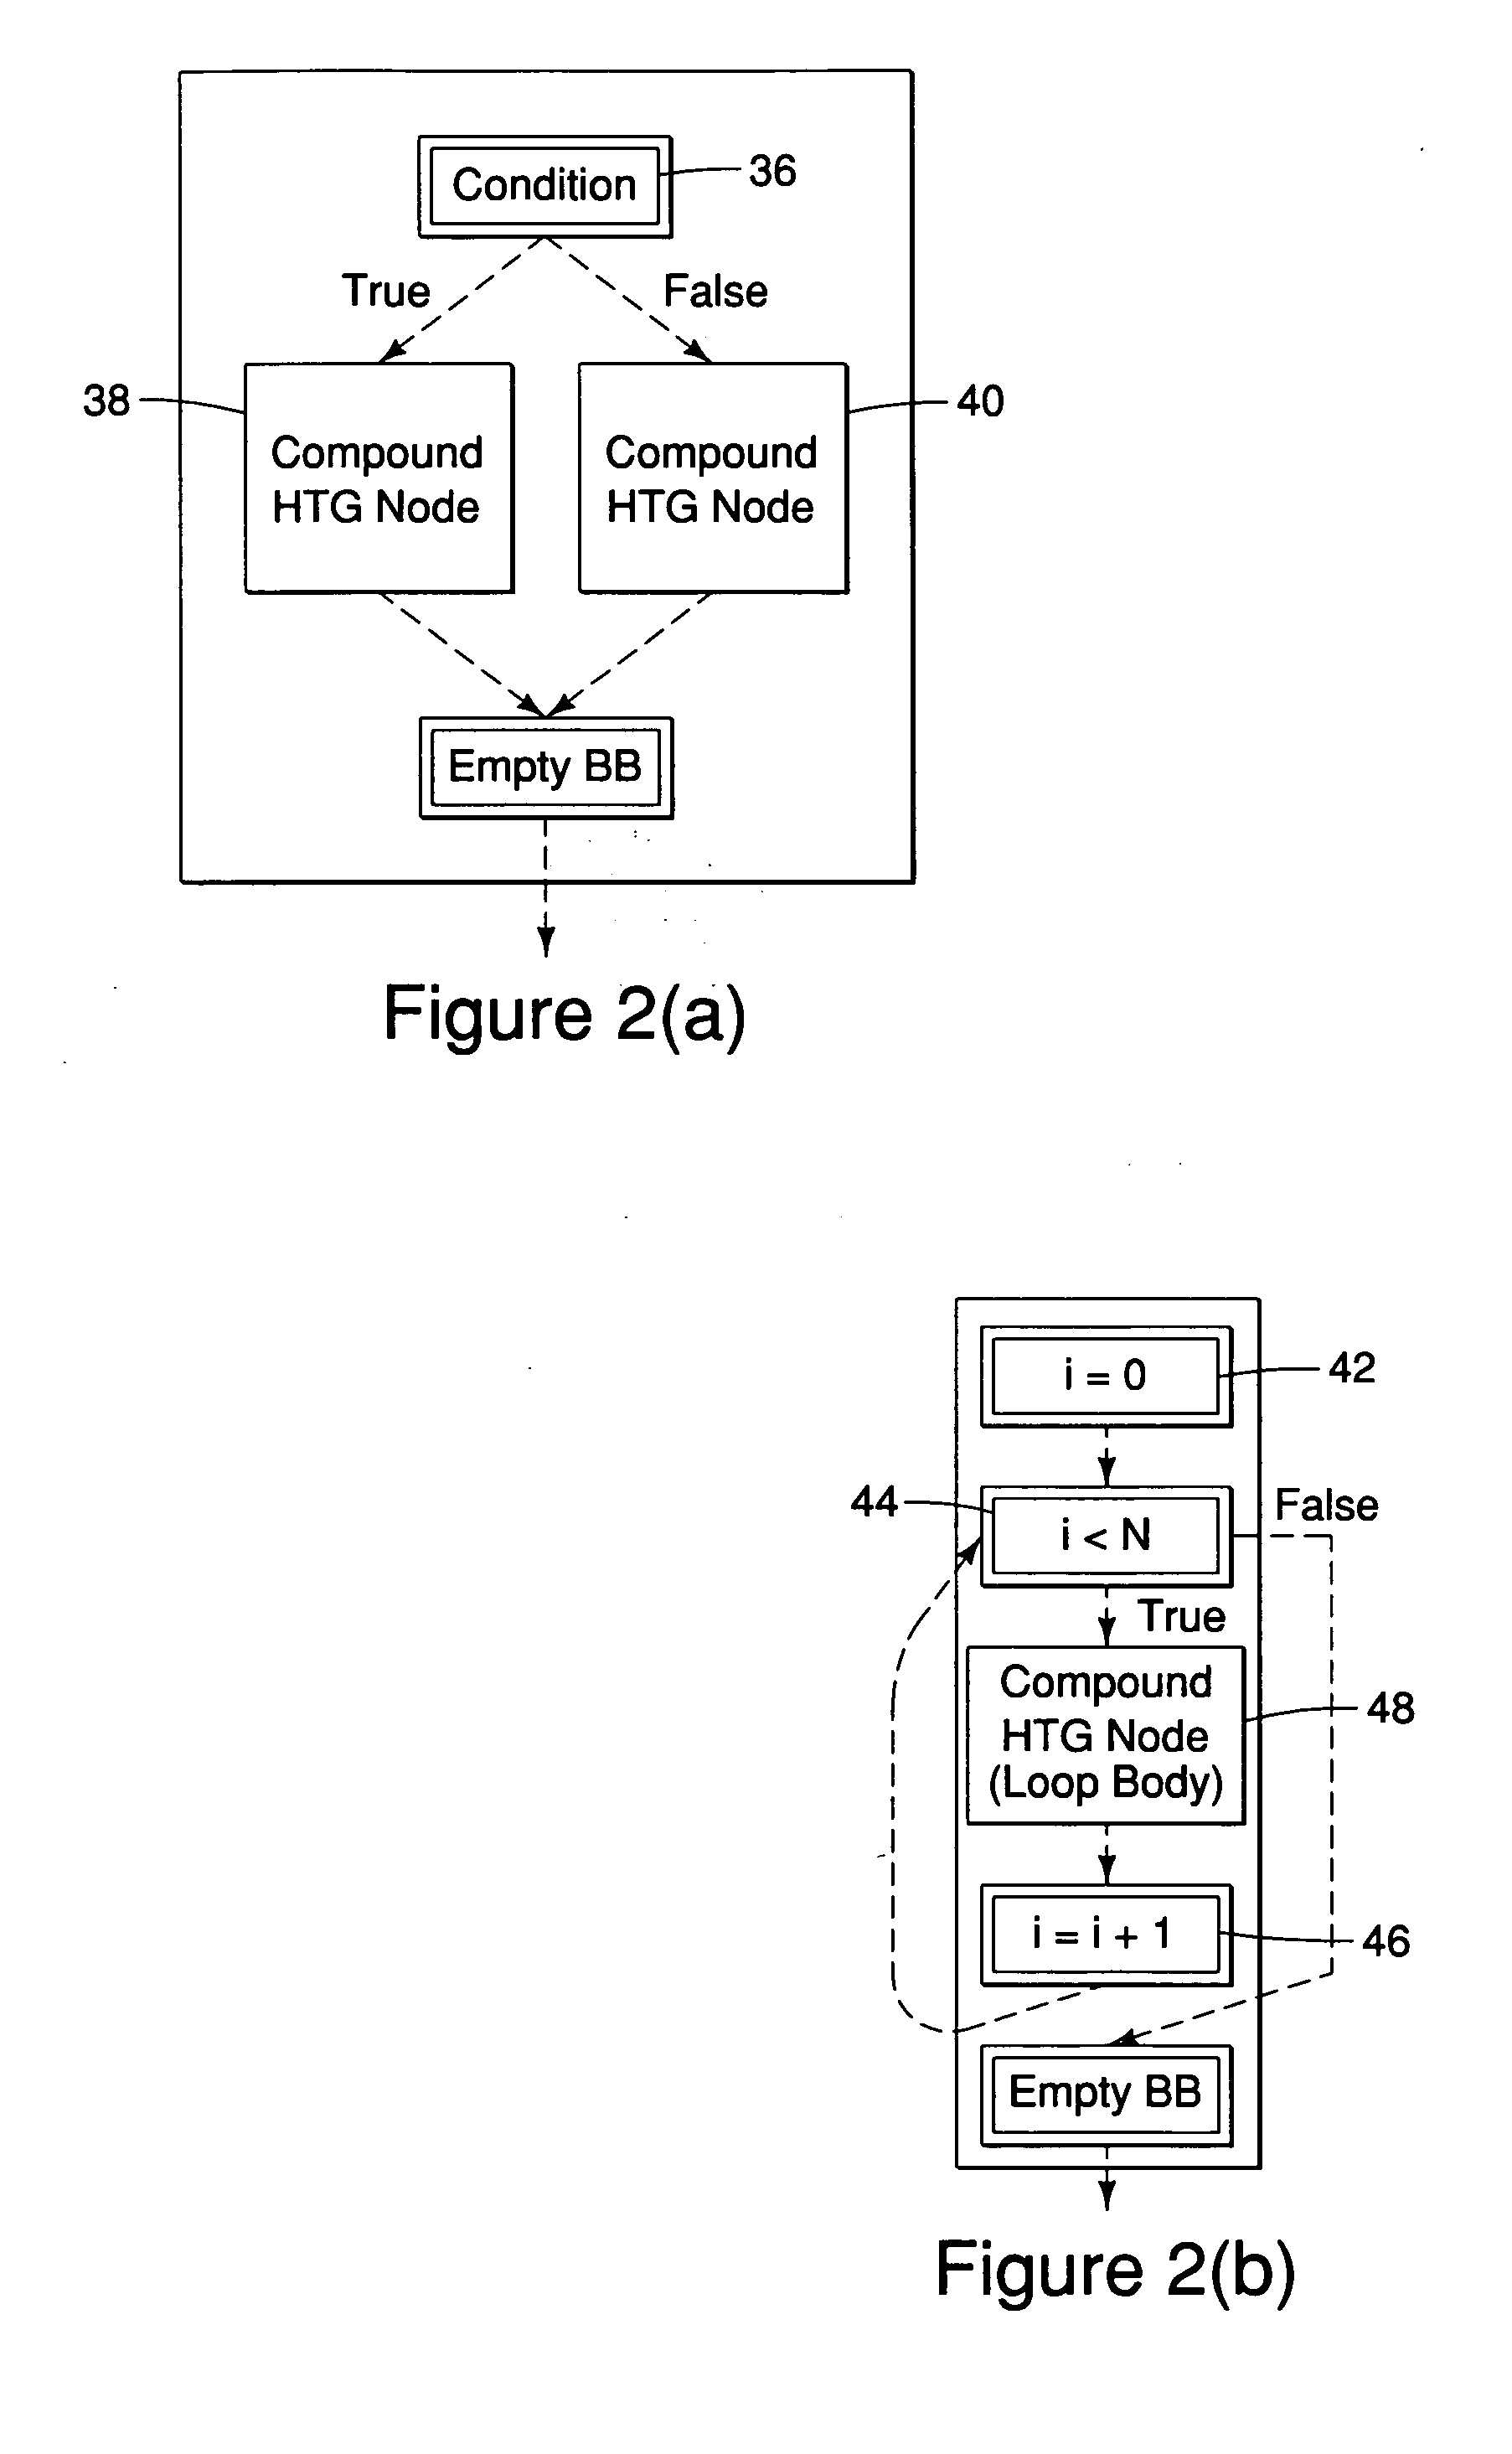 Method and apparatus for designing circuits using high-level synthesis